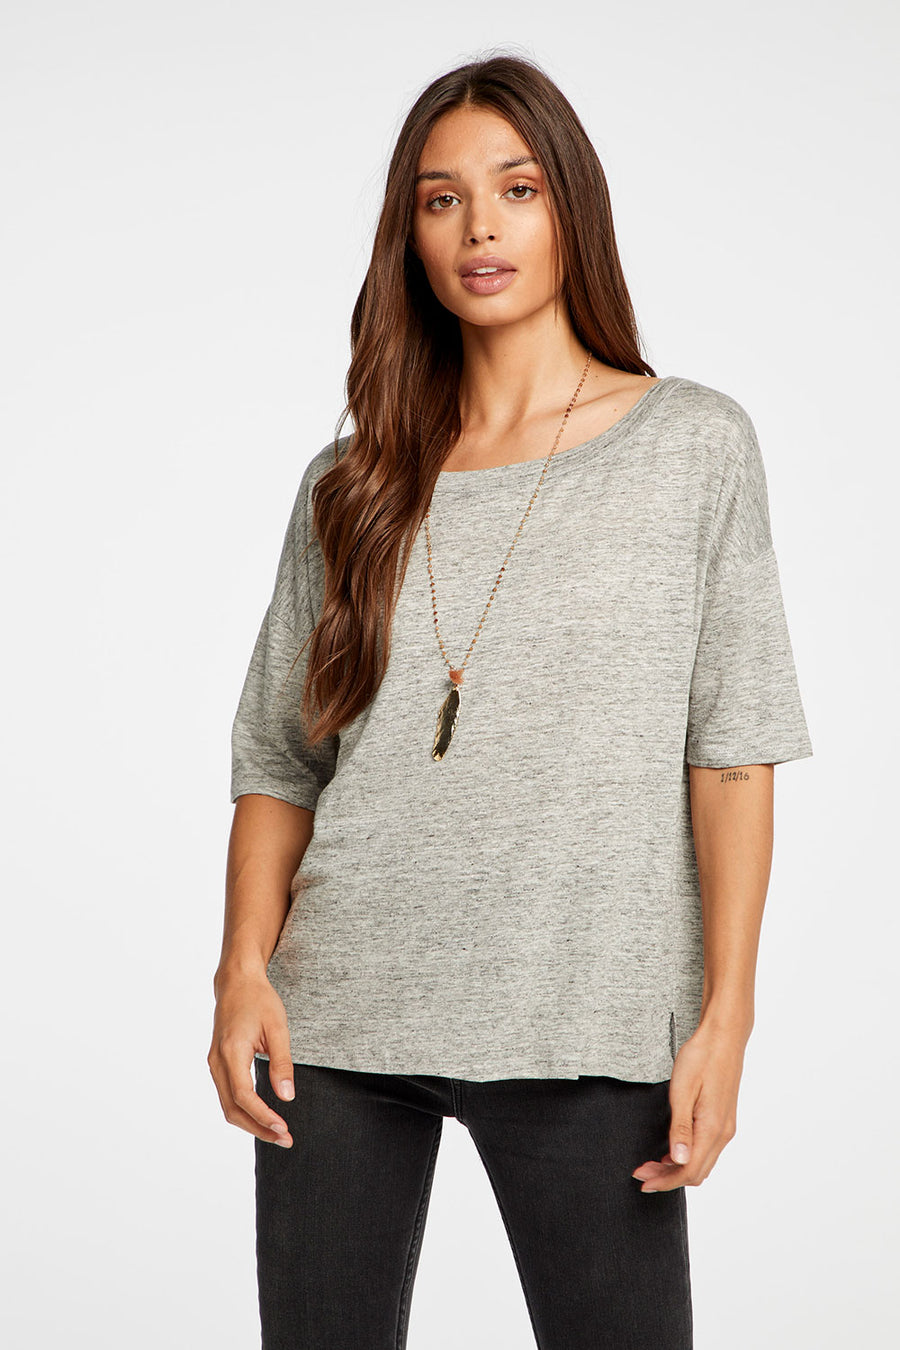 Linen Jersey Cropped Short Sleeve Boxy Hi Lo Tee WOMENS - chaserbrand